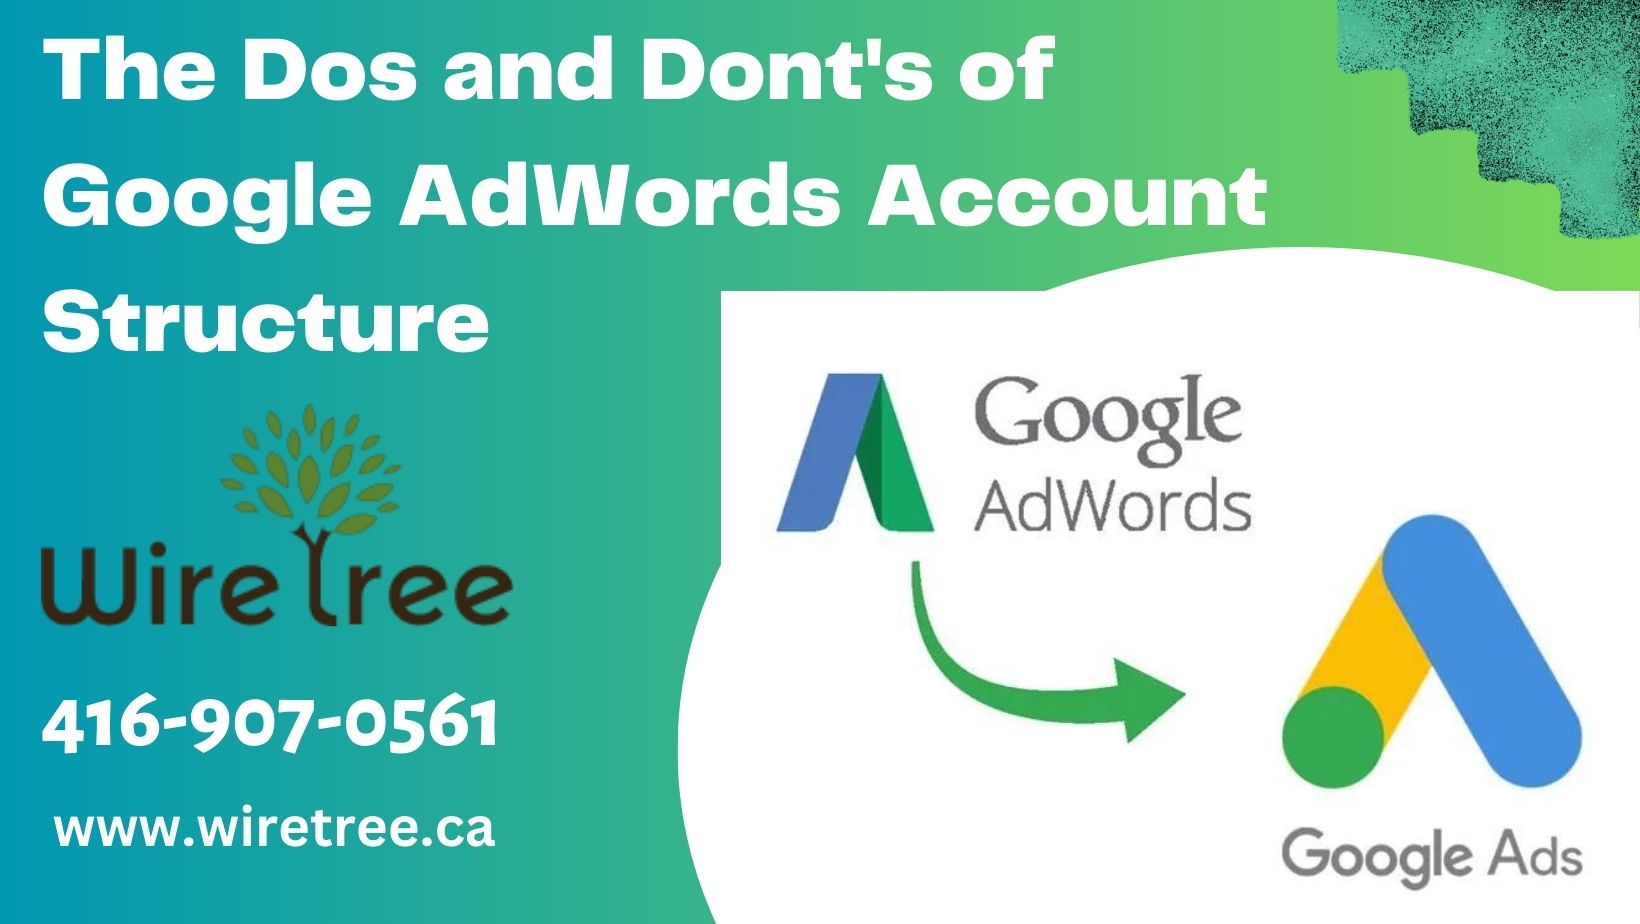 The Dos and Donts of Google AdWords Account Structure